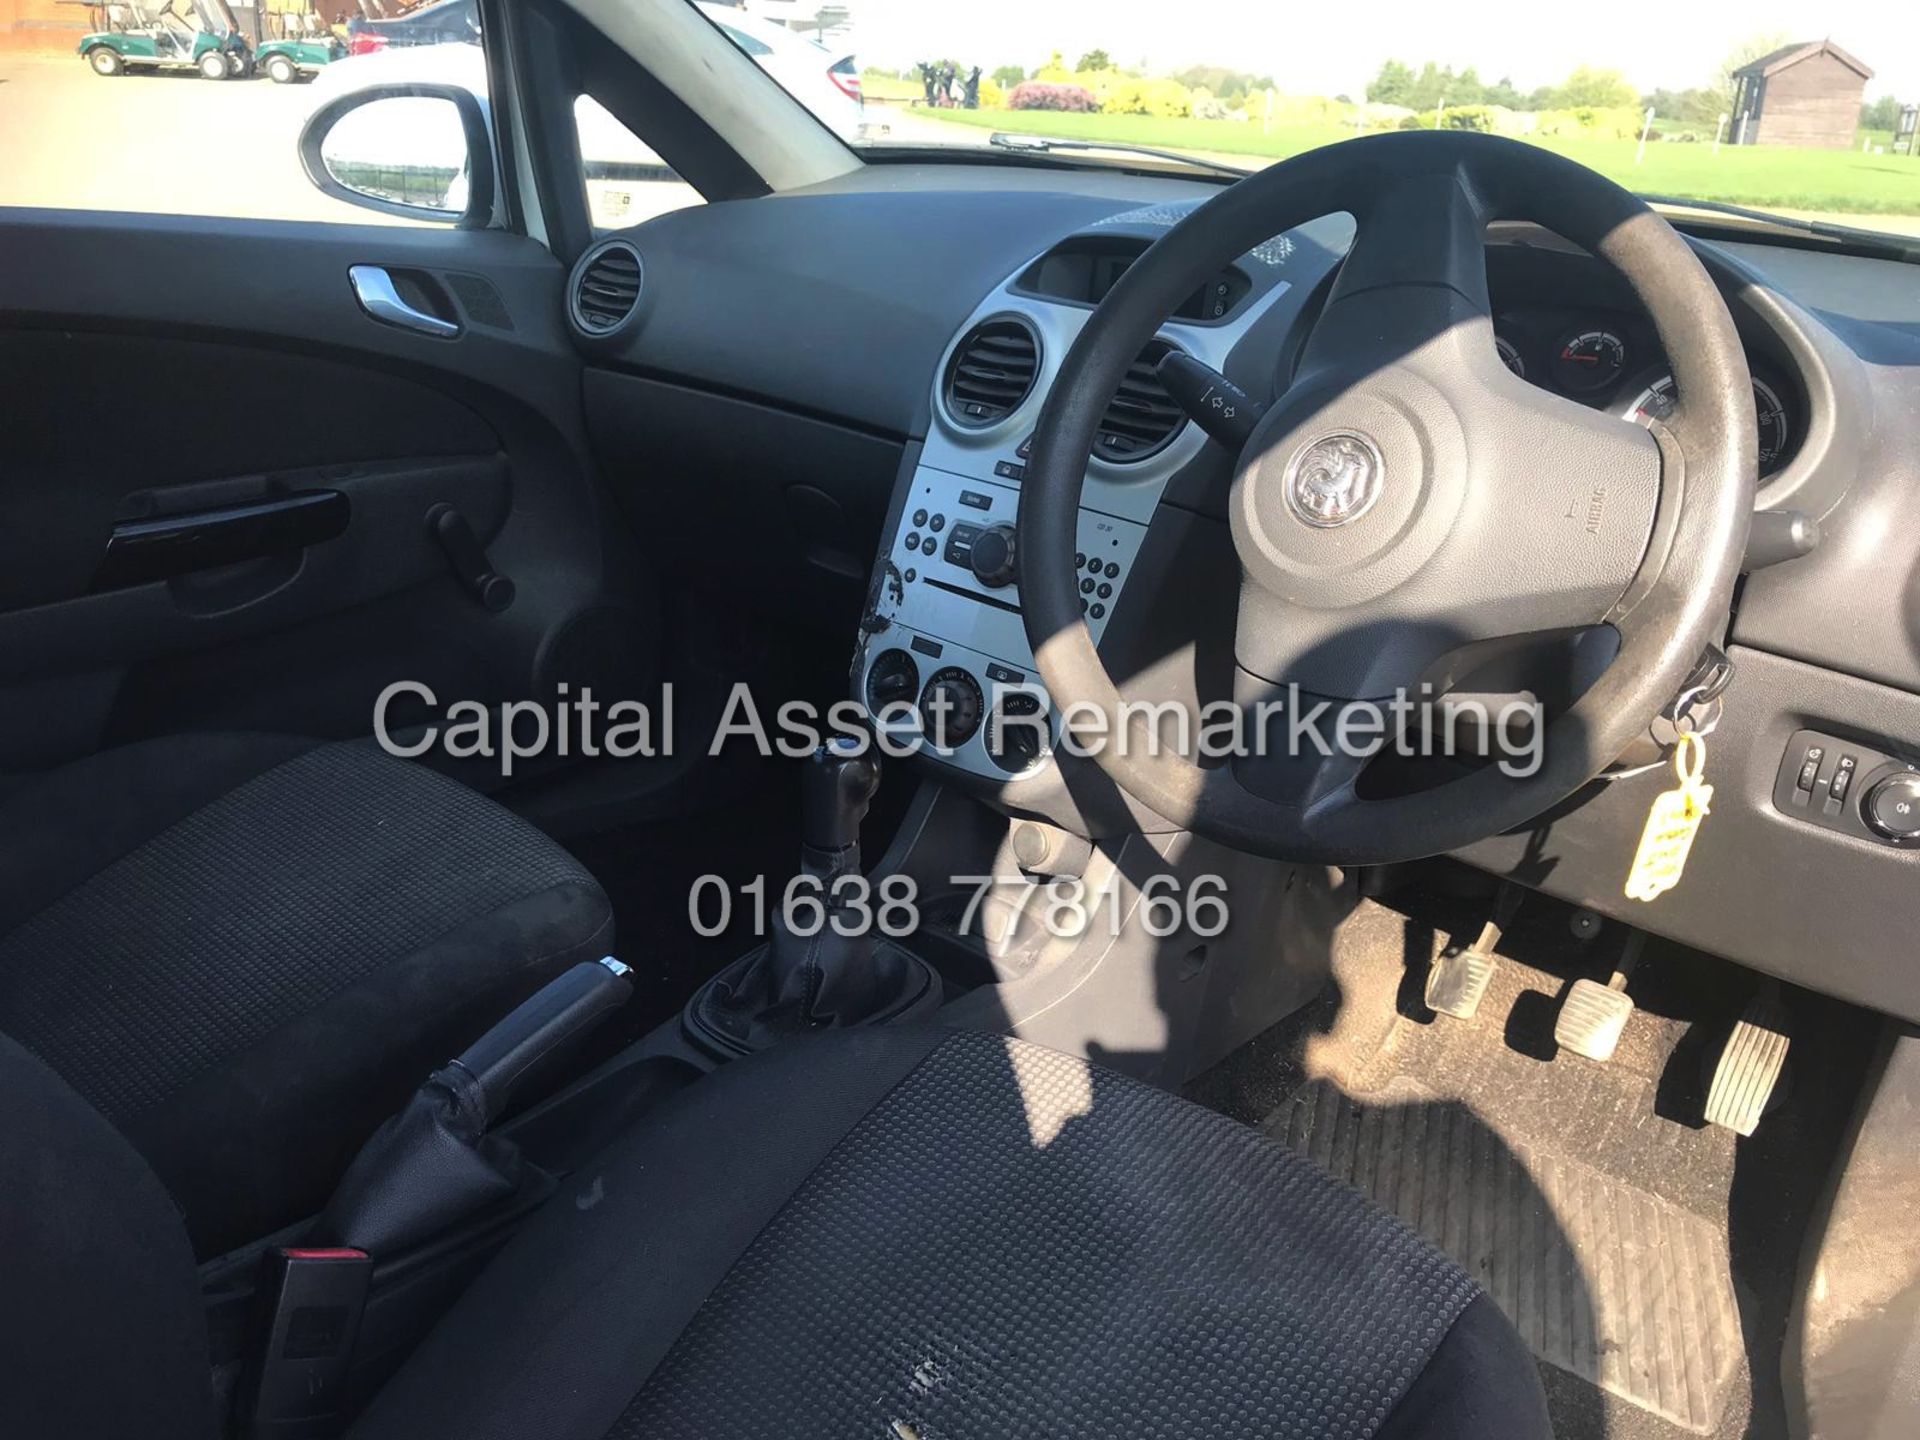 ON SALE VAUXHALL CORSA 1.3CDTI "COMMERCIAL VAN" *NO VAT ON THIS LOT - SAVE 20%) - Image 5 of 6